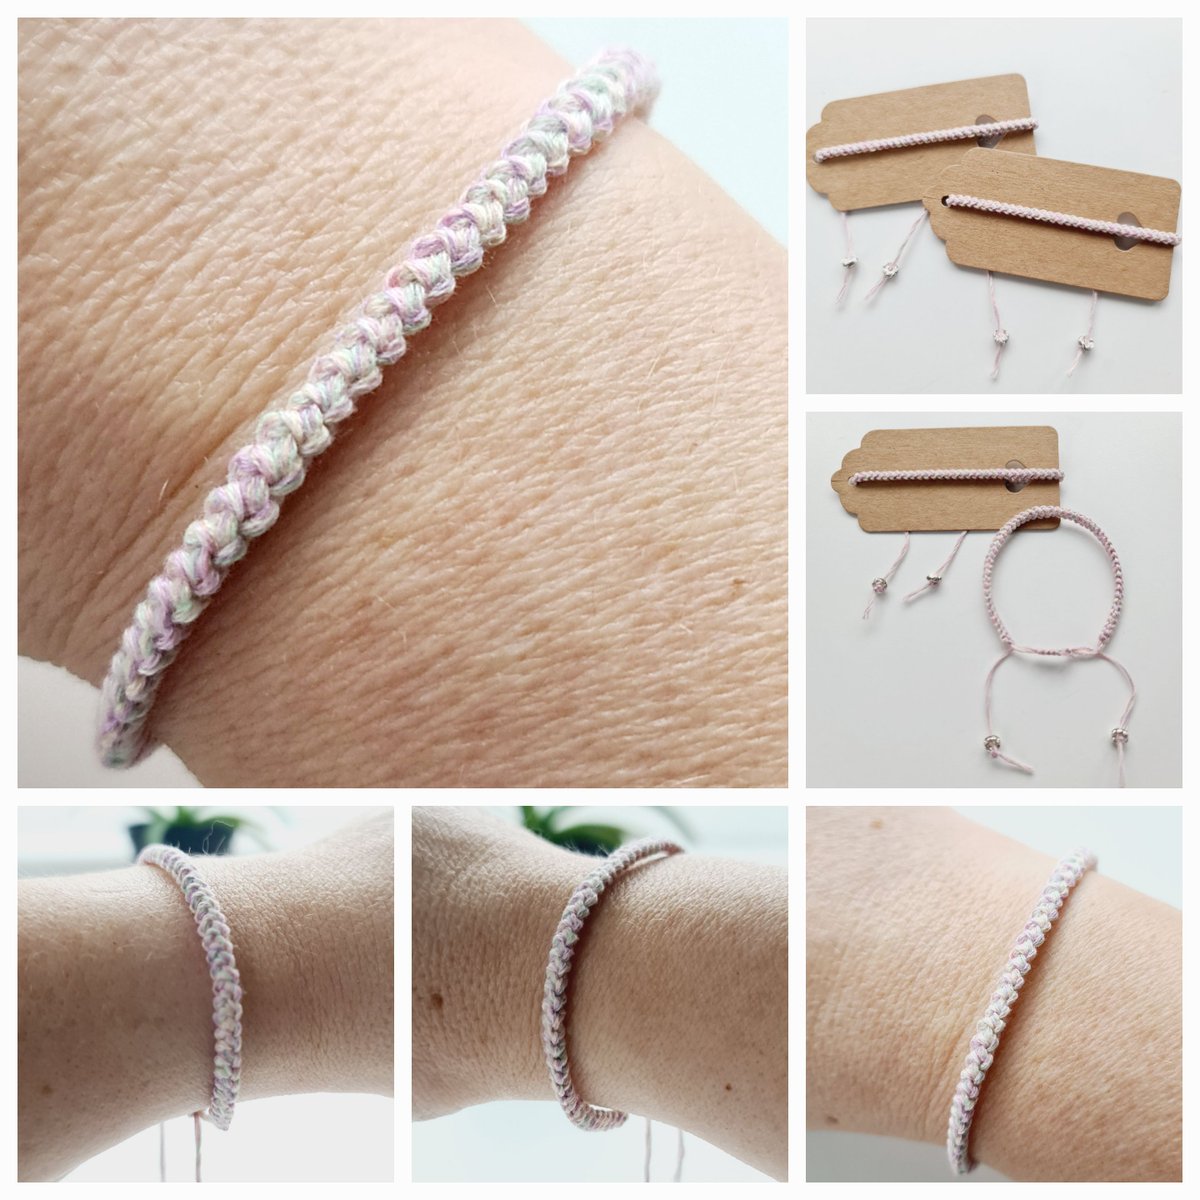 Pretty Pastel Cord Bracelets are perfect for summer gift ideas or a treat for you and a friend. 100% cotton thread. #UKGiftAM ***SPECIAL EDITION*** Limited Stock buy 2 for £6.50, including UK postage. buyindie.co.uk/product/pastel…